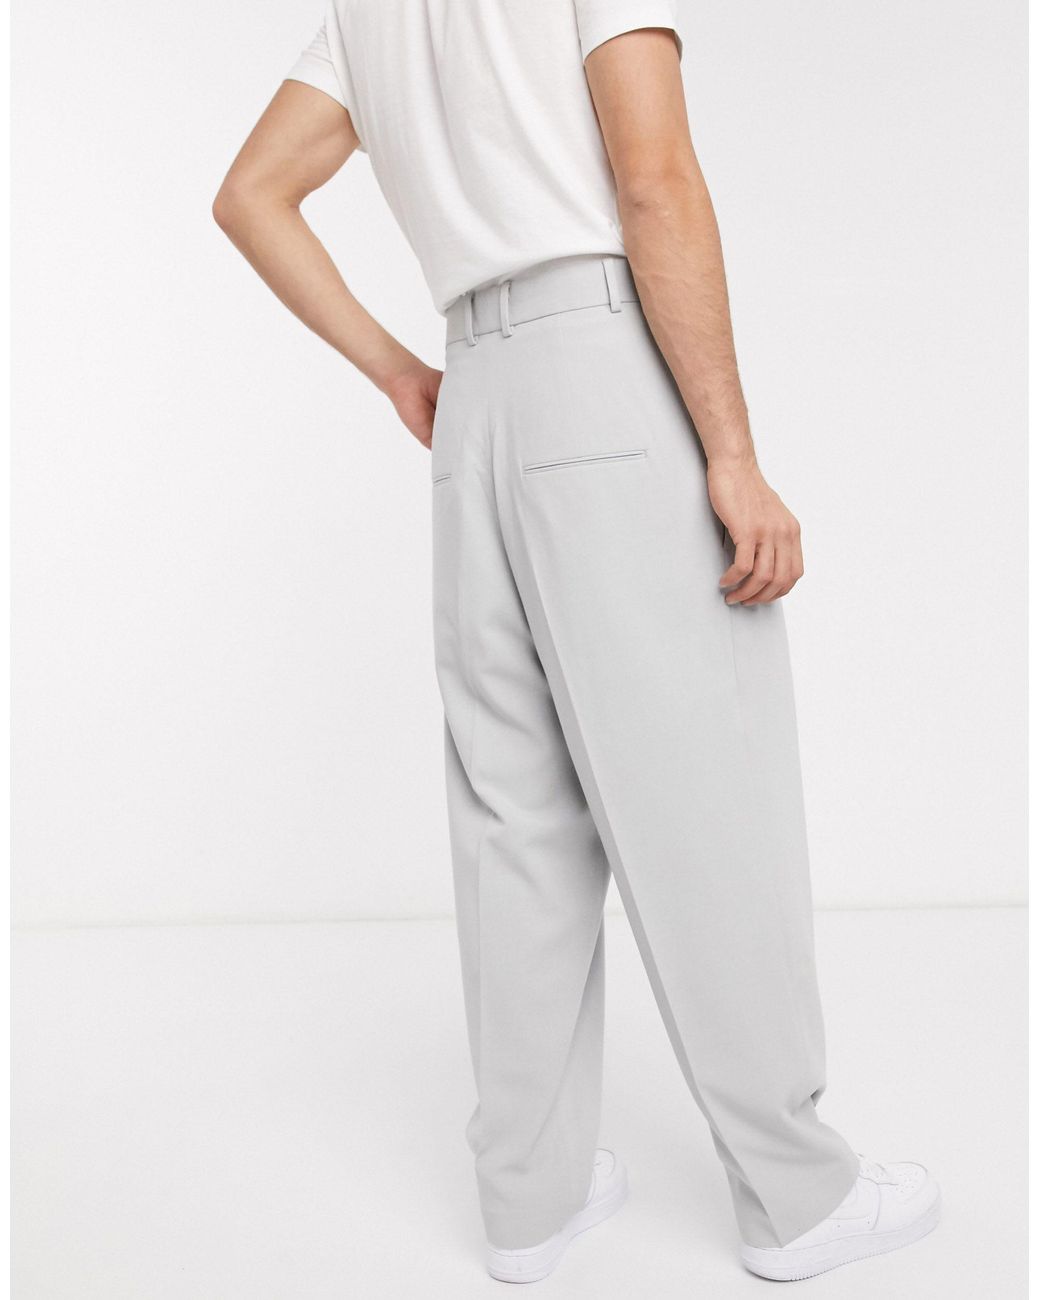 Mens Clothing Trousers ASOS High Waisted Balloon Wool Mix Twill Suit Trousers in Grey for Men Grey Slacks and Chinos Formal trousers 